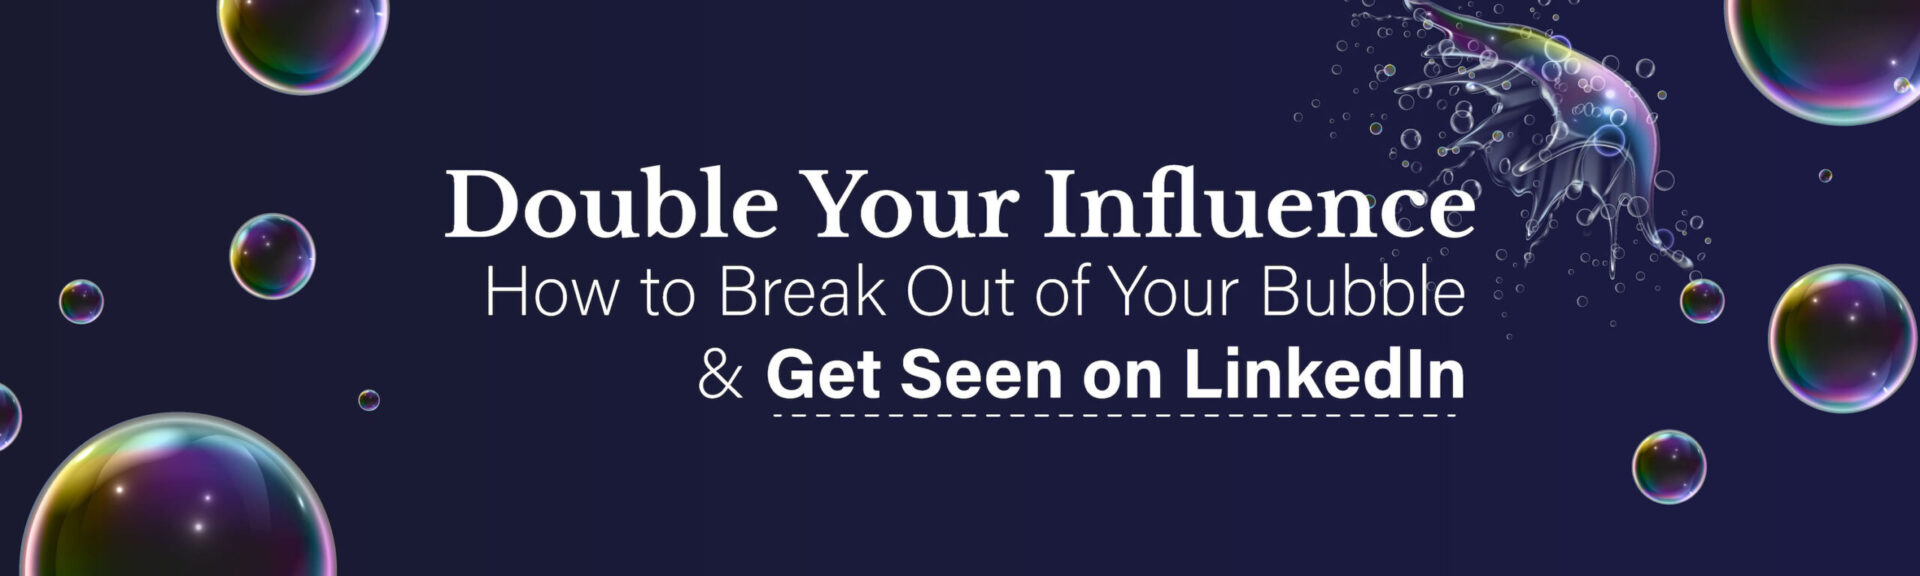 Break Out of Your Bubble and Get Seen on LinkedIn